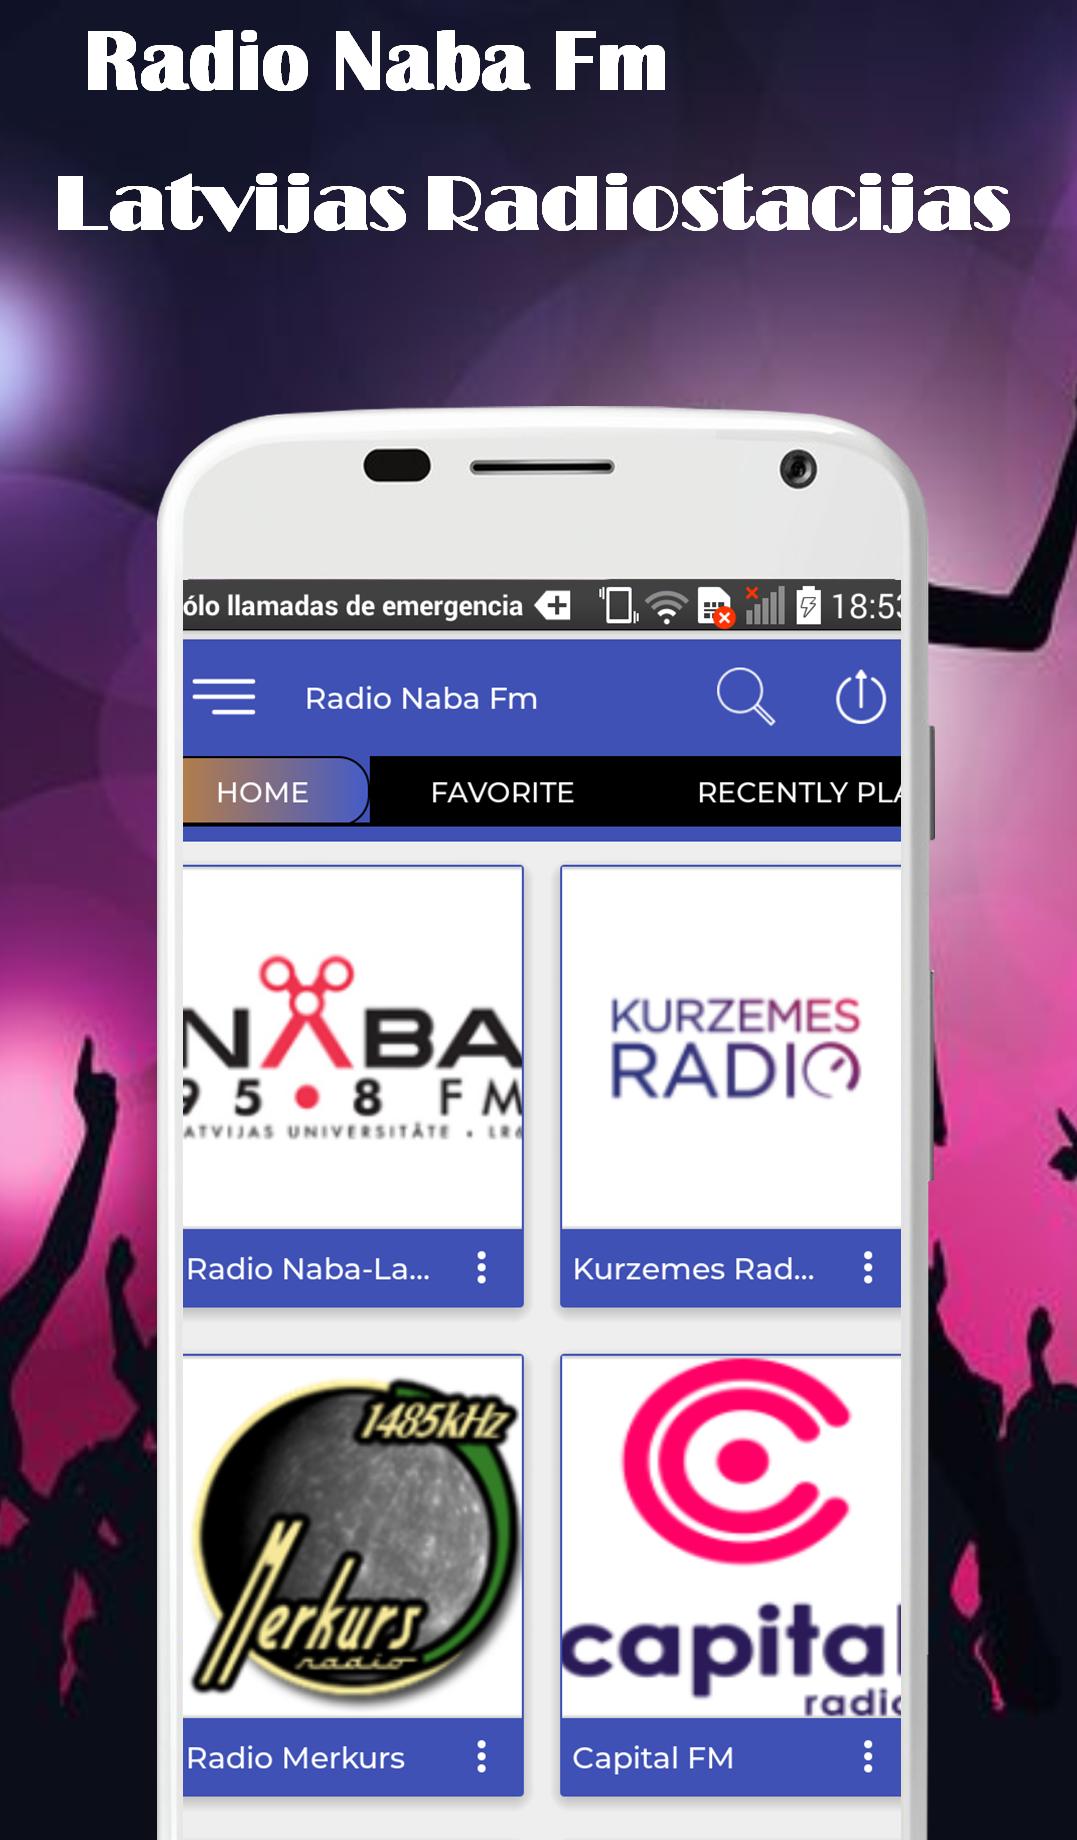 Radio Naba 95.8 Fm Latvia for Android - APK Download